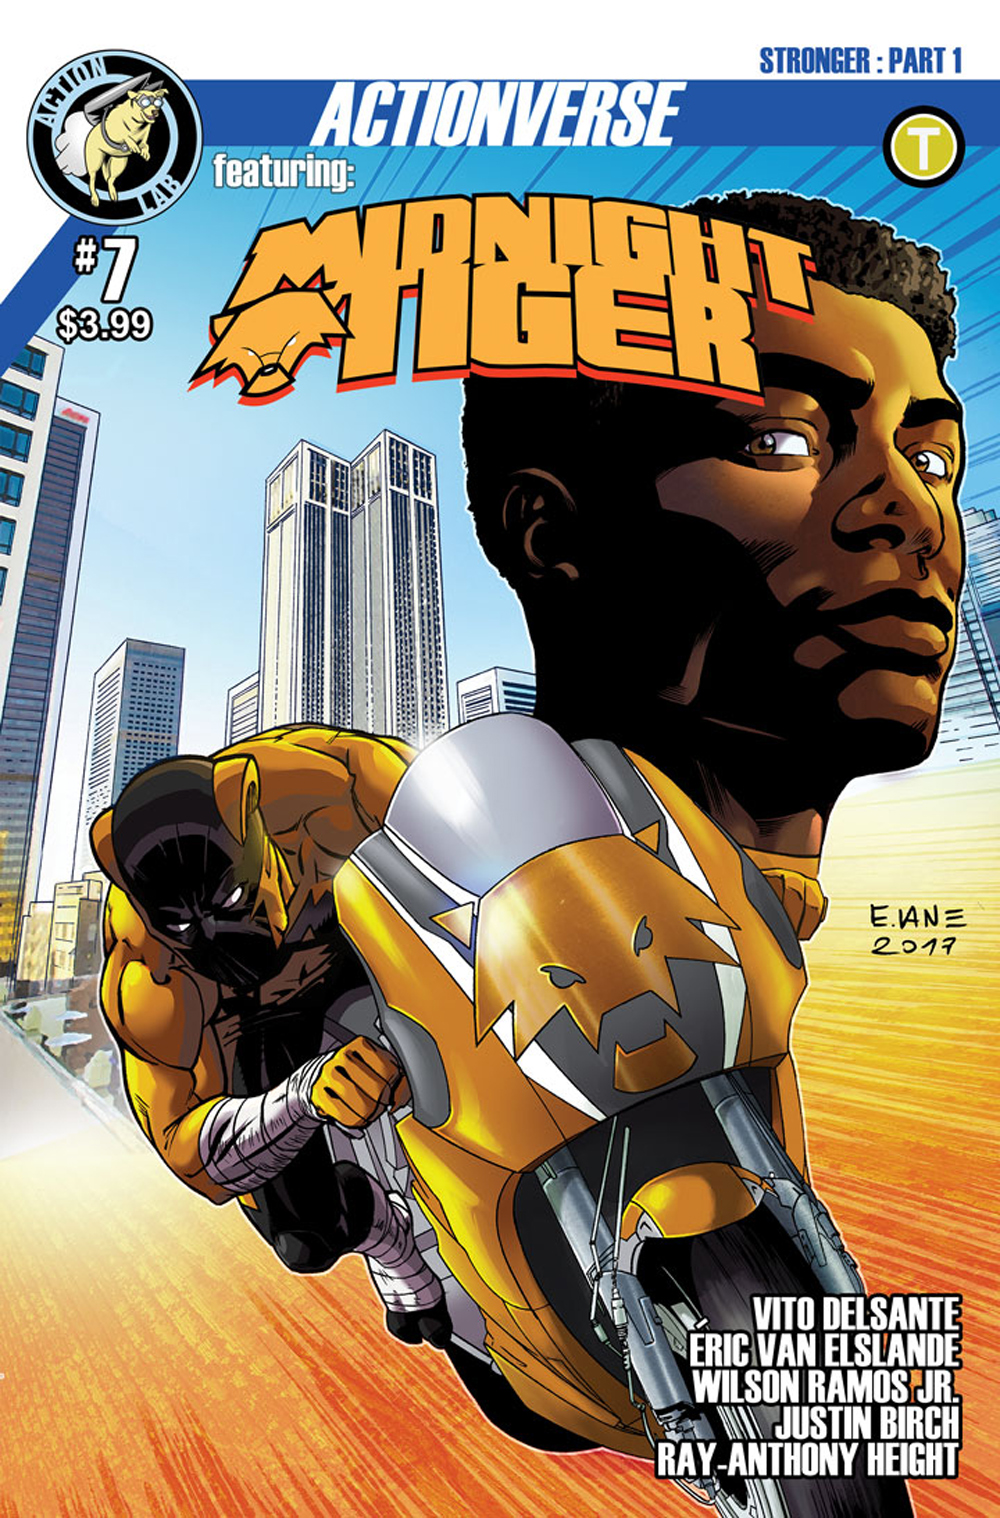 Actionverse #7 Featuring Midnight Tiger Cover A.jpg